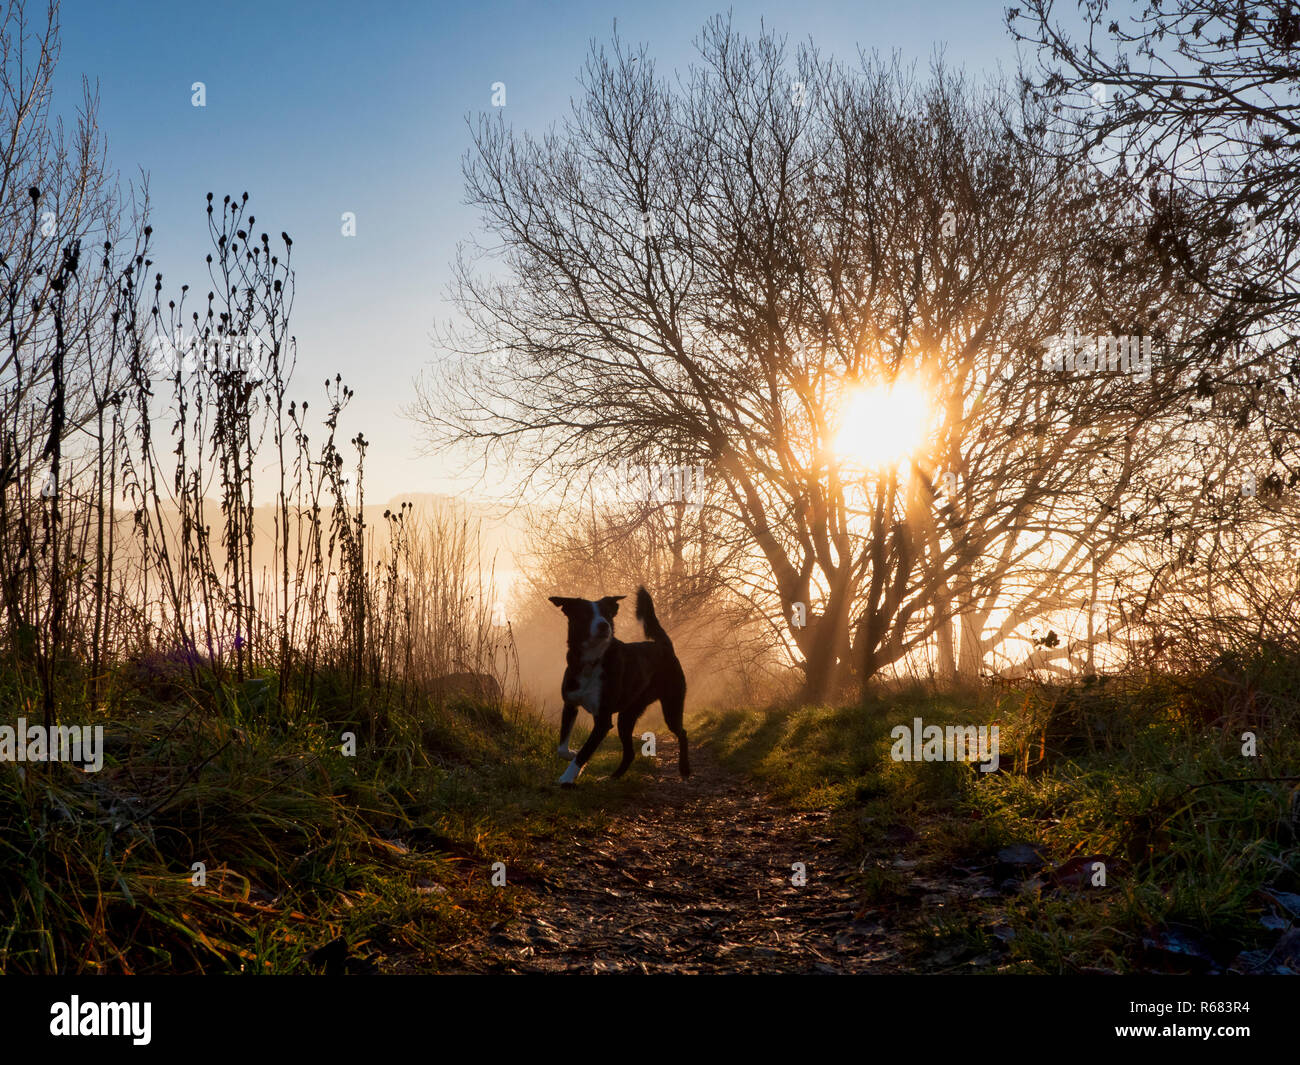 Wirksworth, Derbyshire Dales. 4th Dec 2018. UK Weather: Border Collie dog going for a walk off lead on a cold winter morning during a spectacular sunrise with cloud inversion above Wirksworth in the Derbyshire Dales, Peak District National Park Credit: Doug Blane/Alamy Live News Stock Photo